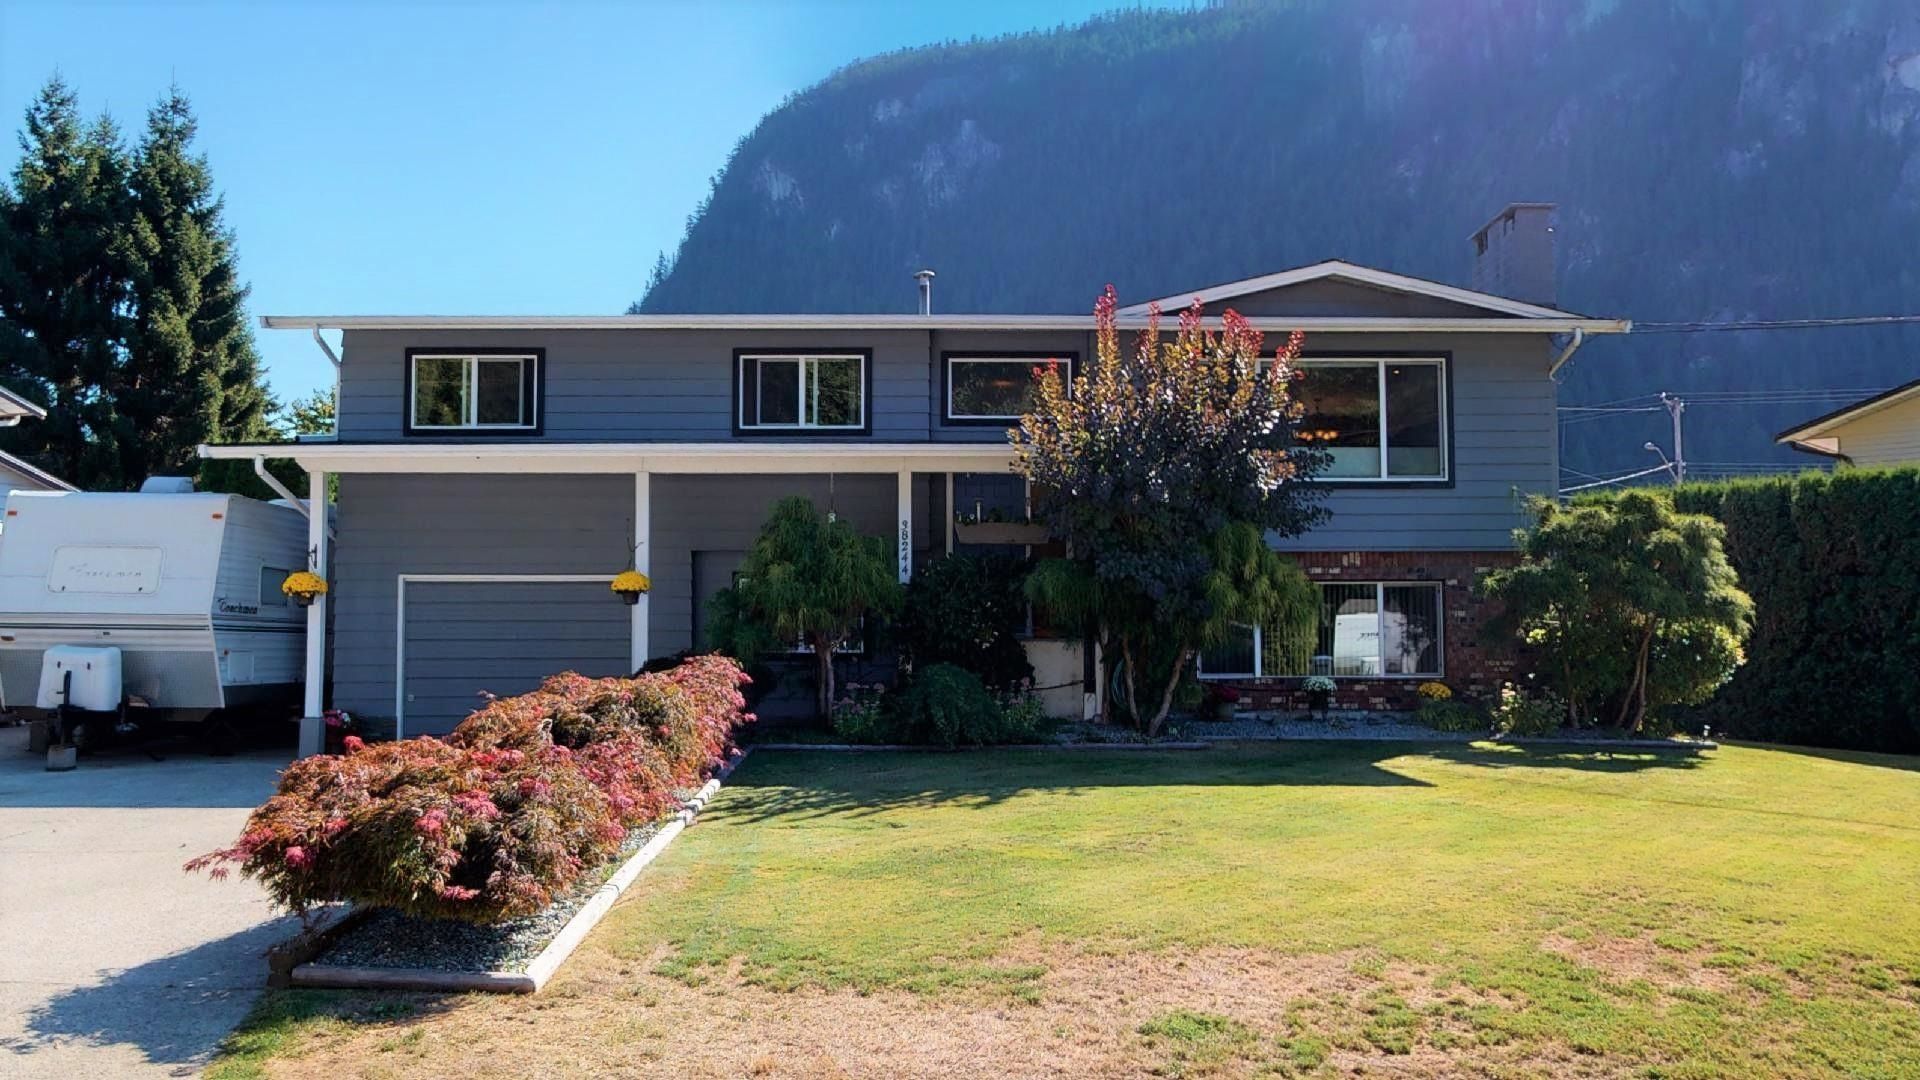 Main Photo: 38244 JUNIPER Crescent in Squamish: Valleycliffe House for sale : MLS®# R2616219